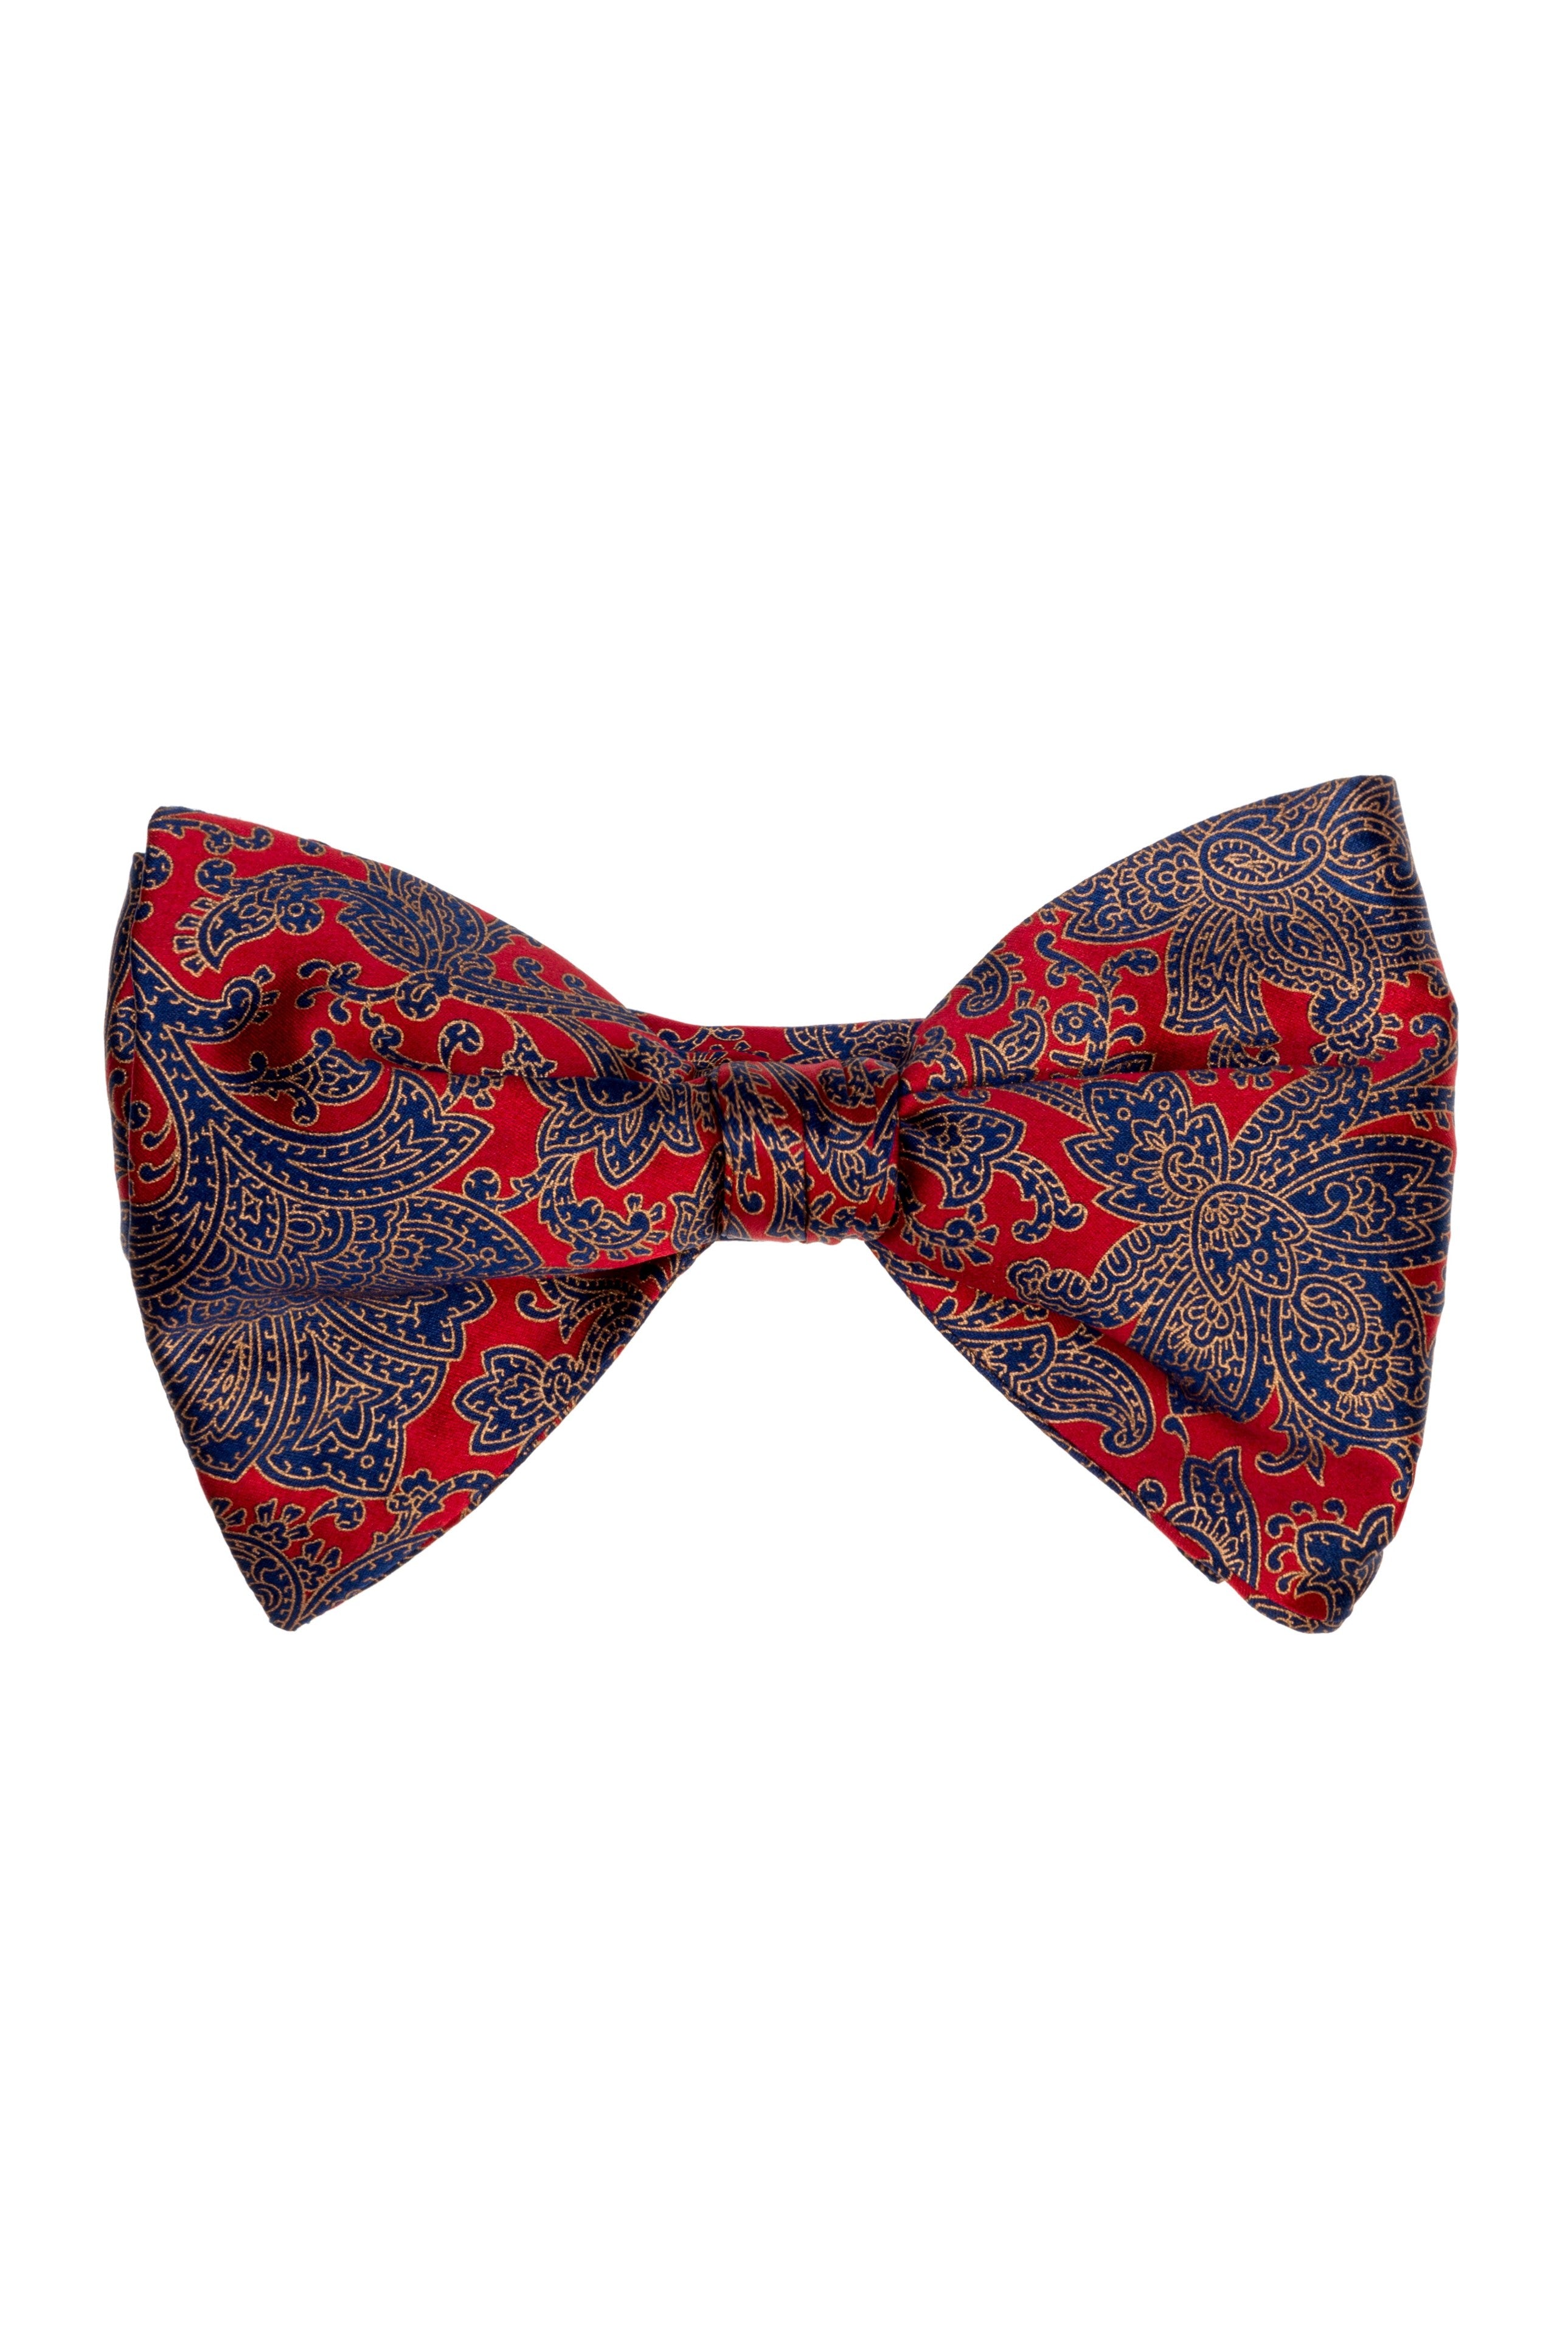 Roman Red Floral Bow-Tie - Traditional Hand Print